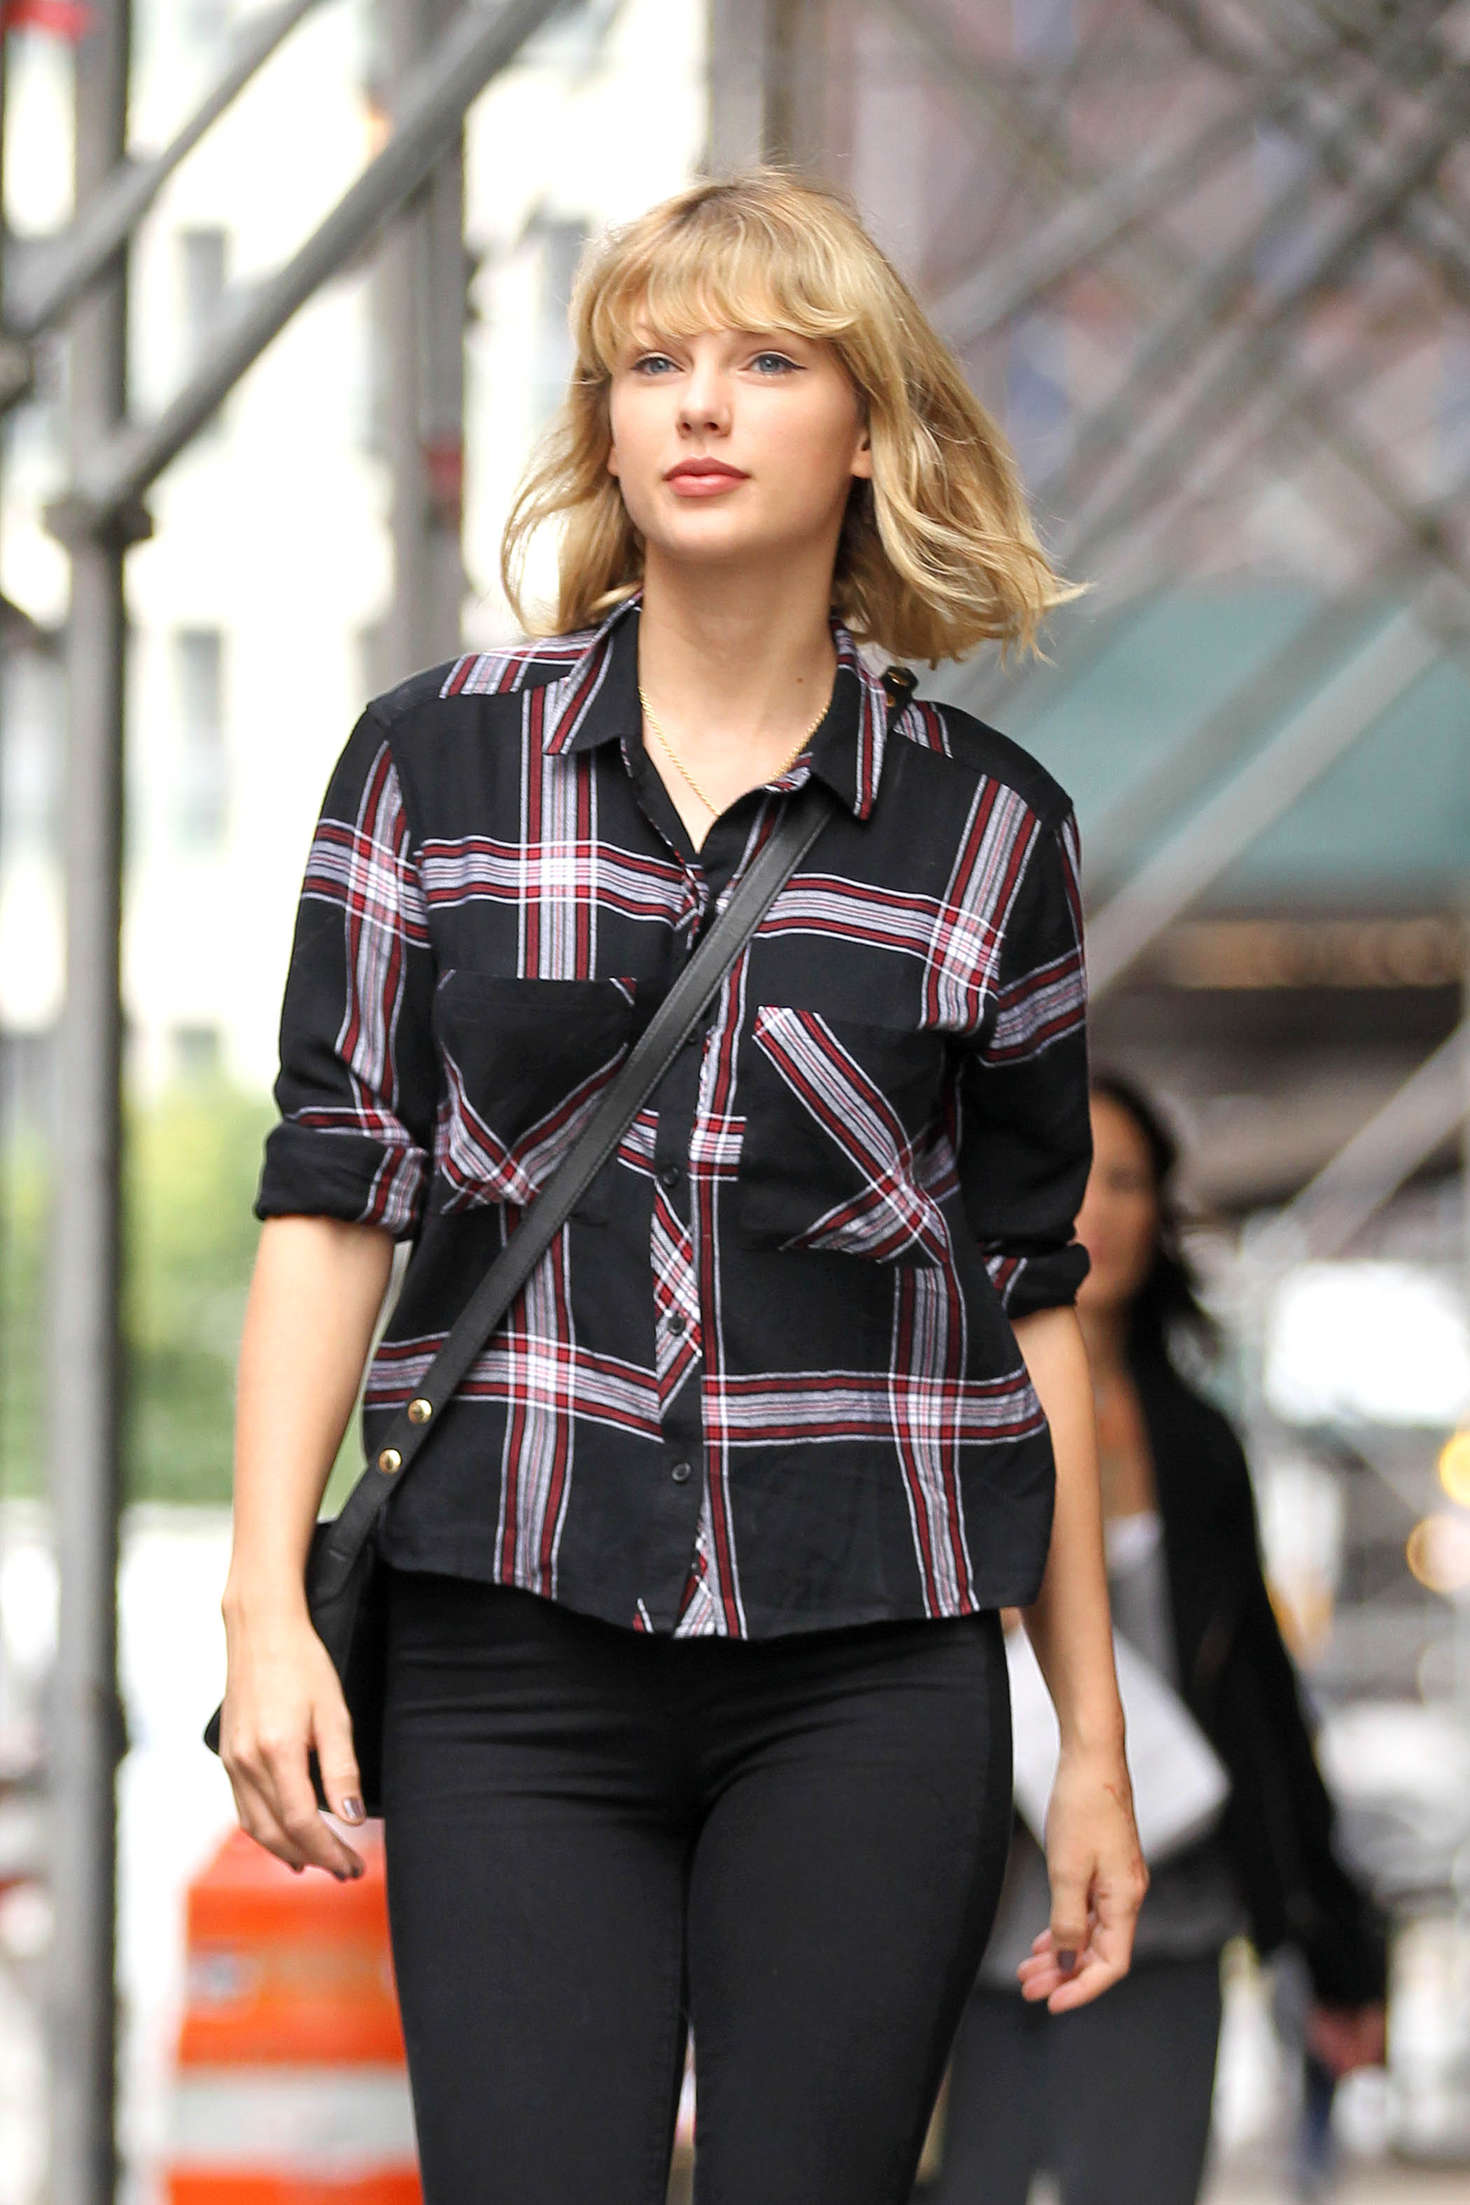 Taylor Swift Leaving her TriBeCa Apartment in NY